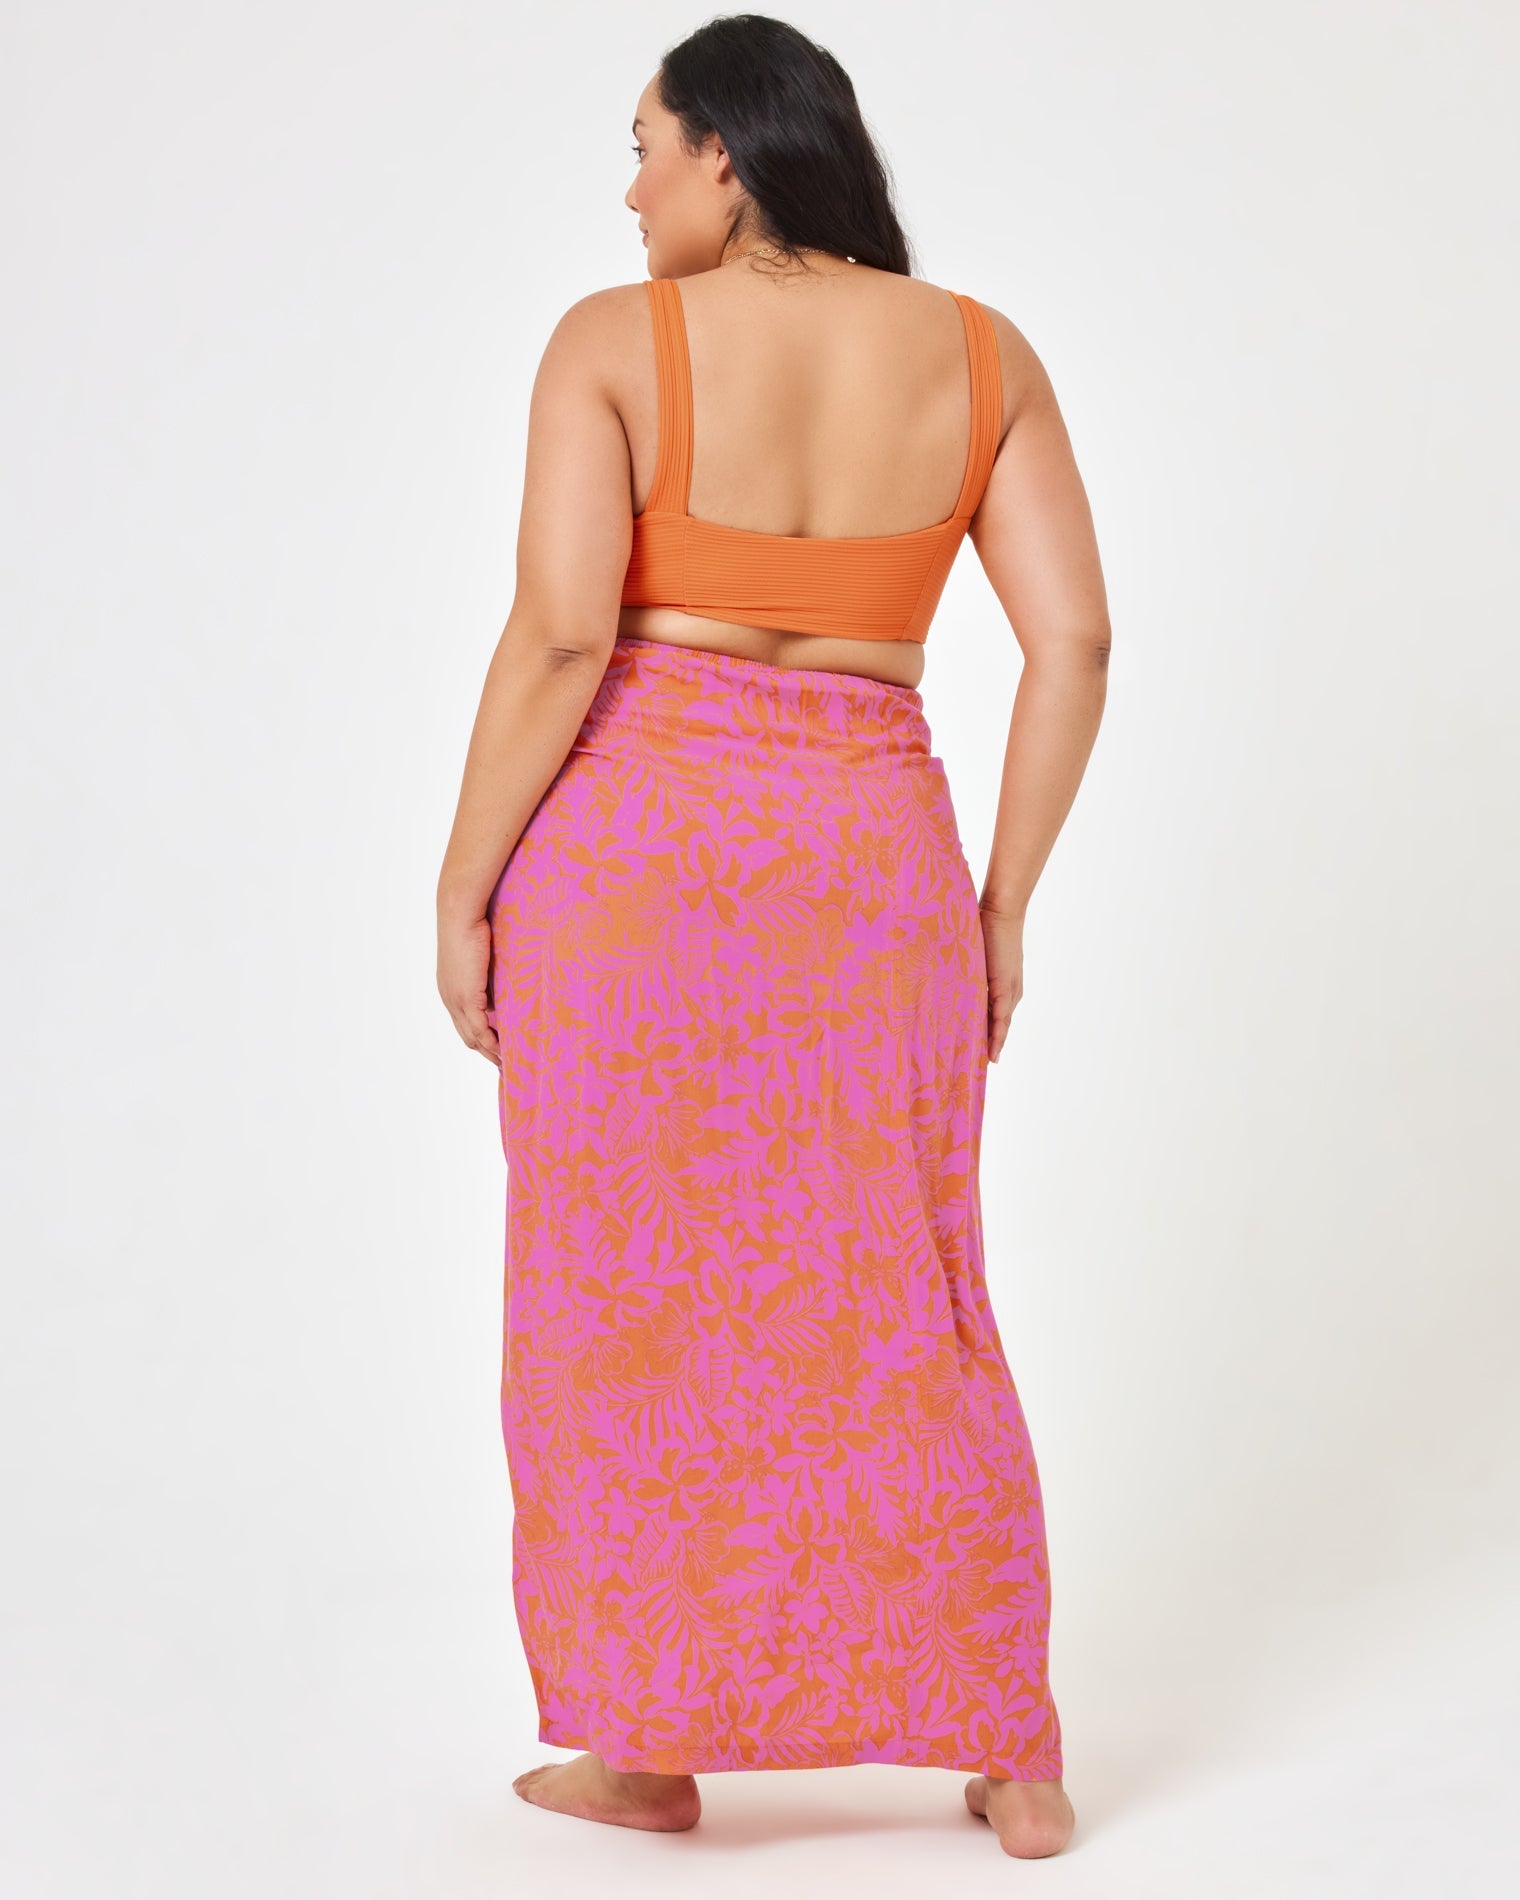 Printed Mia Cover-Up Path To Paradise | Model: Bianca (size: XL)